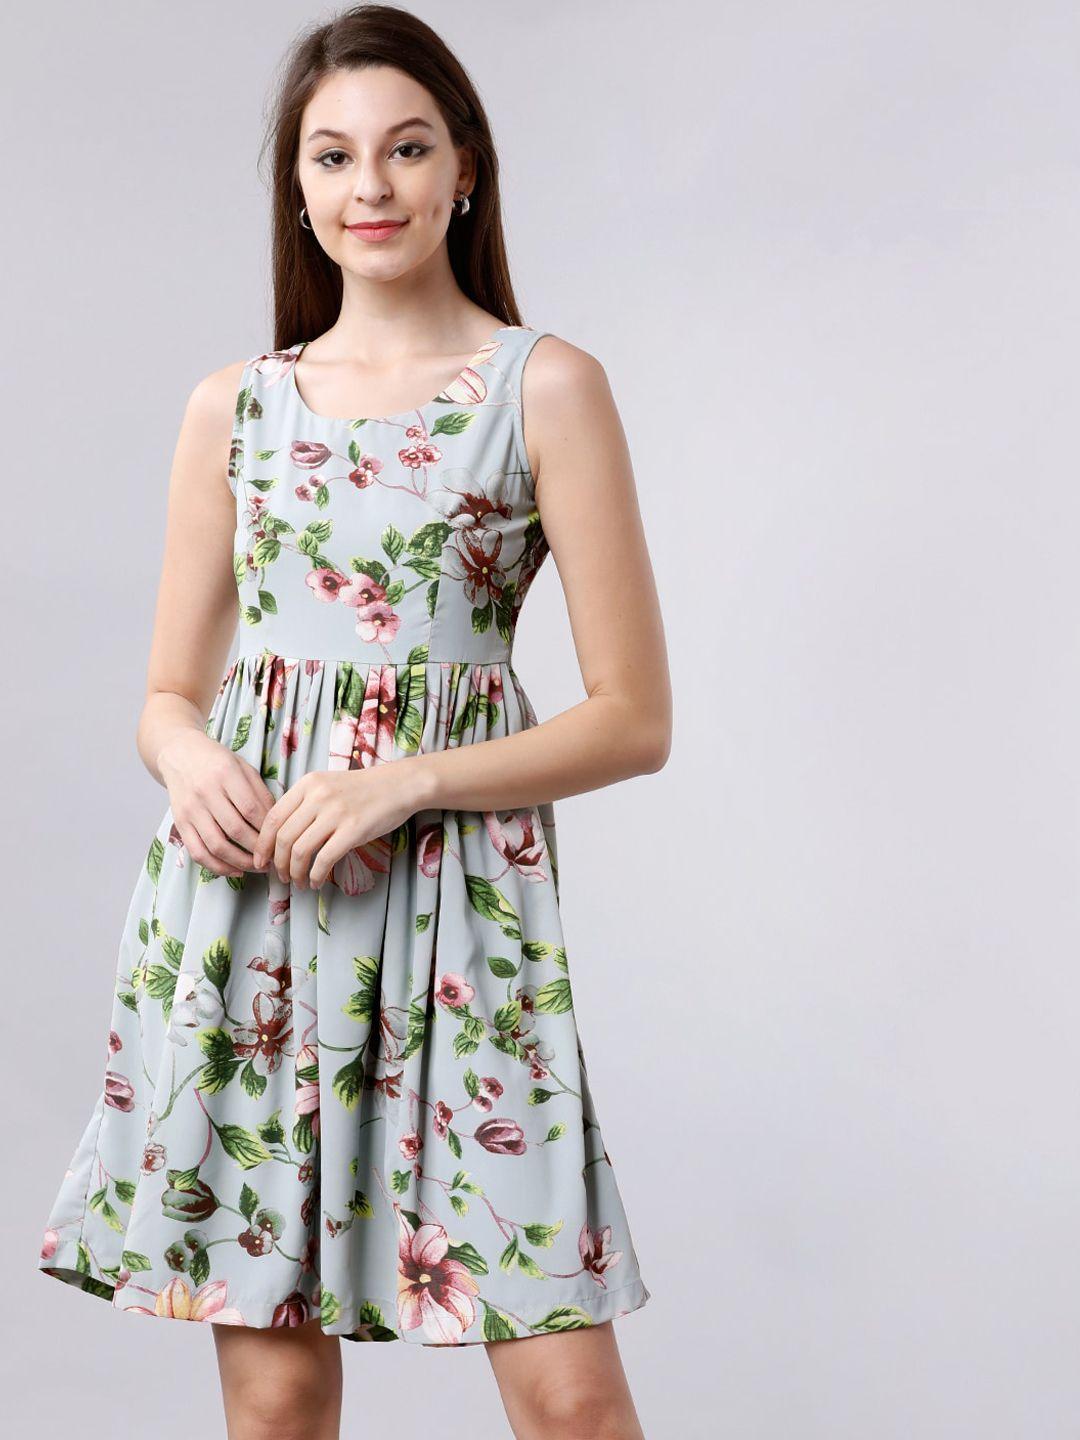 tokyo talkies women grey & brown floral print fit and flare dress